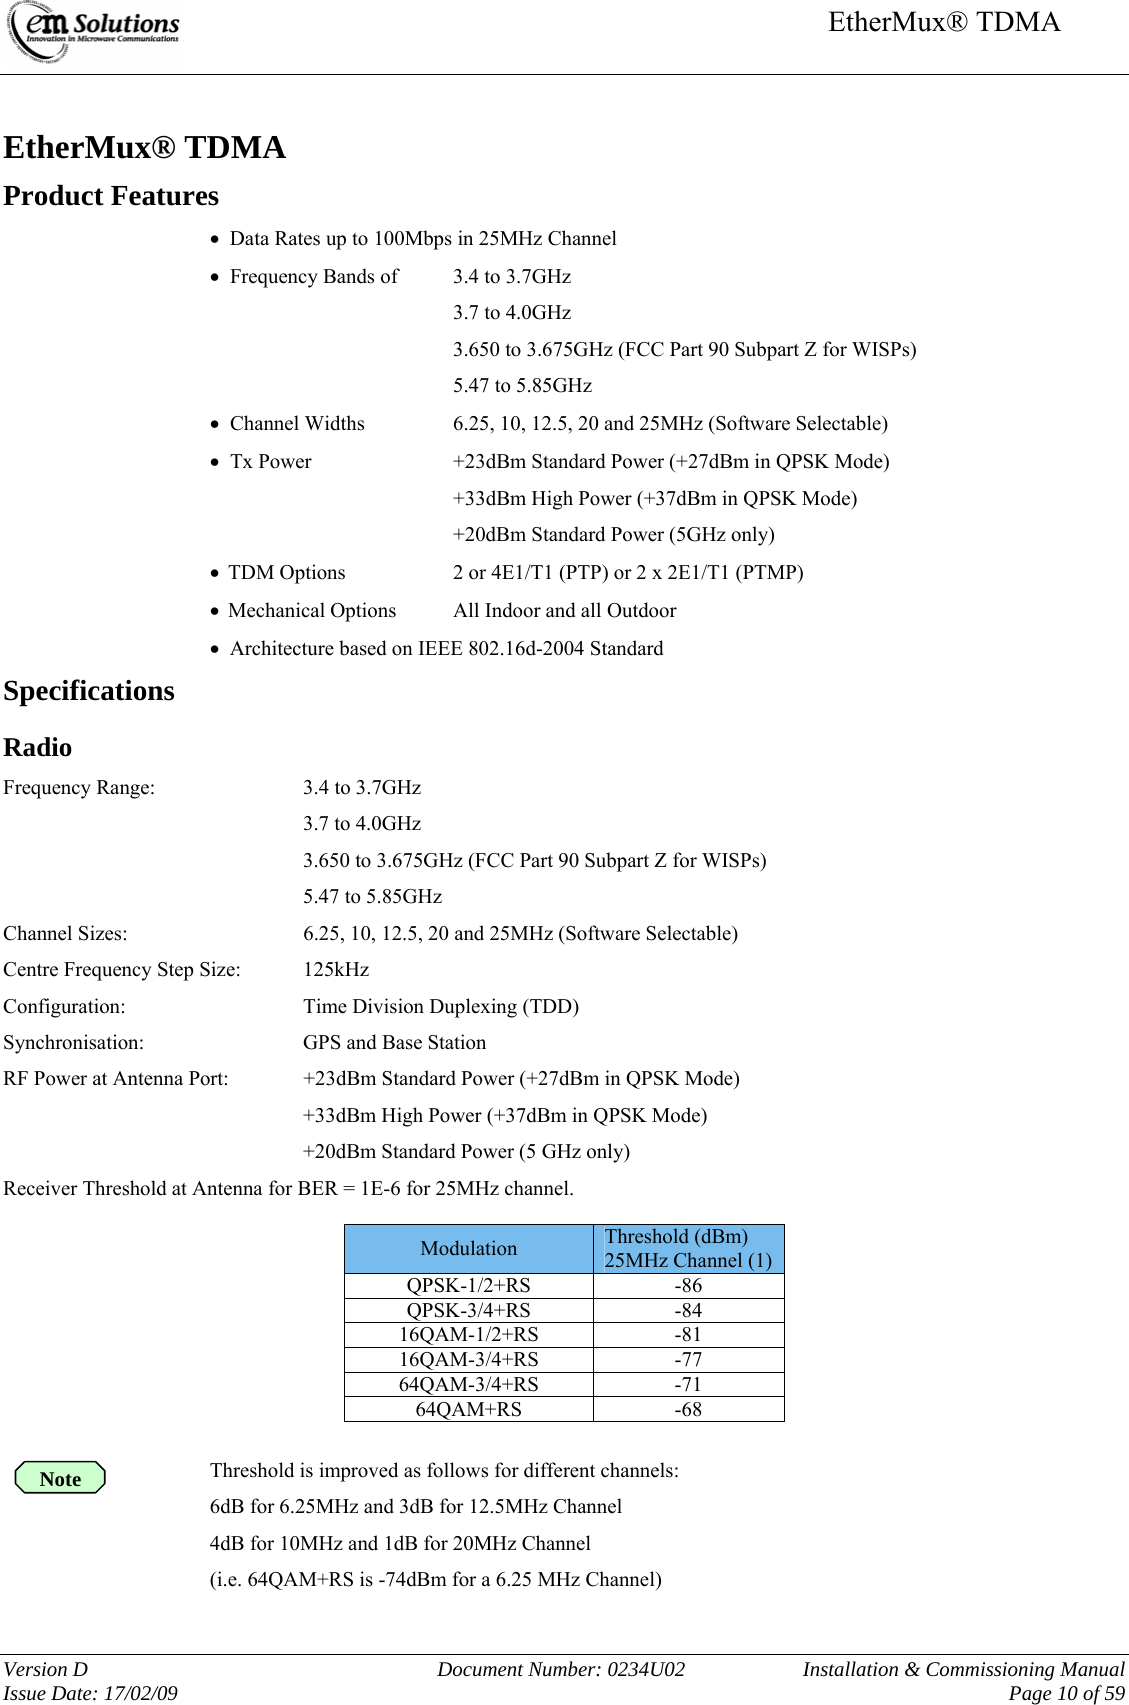     EtherMux® TDMA   Version D  Document Number: 0234U02   Installation &amp; Commissioning Manual Issue Date: 17/02/09     Page 10 of 59  EtherMux® TDMA Product Features •  Data Rates up to 100Mbps in 25MHz Channel •  Frequency Bands of  3.4 to 3.7GHz 3.7 to 4.0GHz 3.650 to 3.675GHz (FCC Part 90 Subpart Z for WISPs) 5.47 to 5.85GHz •  Channel Widths     6.25, 10, 12.5, 20 and 25MHz (Software Selectable) •  Tx Power     +23dBm Standard Power (+27dBm in QPSK Mode) +33dBm High Power (+37dBm in QPSK Mode) +20dBm Standard Power (5GHz only) • TDM Options    2 or 4E1/T1 (PTP) or 2 x 2E1/T1 (PTMP) • Mechanical Options  All Indoor and all Outdoor  •  Architecture based on IEEE 802.16d-2004 Standard Specifications Radio Frequency Range:     3.4 to 3.7GHz 3.7 to 4.0GHz 3.650 to 3.675GHz (FCC Part 90 Subpart Z for WISPs) 5.47 to 5.85GHz Channel Sizes:      6.25, 10, 12.5, 20 and 25MHz (Software Selectable) Centre Frequency Step Size:  125kHz Configuration:    Time Division Duplexing (TDD) Synchronisation:    GPS and Base Station RF Power at Antenna Port:  +23dBm Standard Power (+27dBm in QPSK Mode) +33dBm High Power (+37dBm in QPSK Mode) +20dBm Standard Power (5 GHz only) Receiver Threshold at Antenna for BER = 1E-6 for 25MHz channel.  Modulation   Threshold (dBm) 25MHz Channel (1) QPSK-1/2+RS -86 QPSK-3/4+RS -84 16QAM-1/2+RS -81 16QAM-3/4+RS -77 64QAM-3/4+RS -71 64QAM+RS -68  Threshold is improved as follows for different channels: 6dB for 6.25MHz and 3dB for 12.5MHz Channel 4dB for 10MHz and 1dB for 20MHz Channel (i.e. 64QAM+RS is -74dBm for a 6.25 MHz Channel) Note 